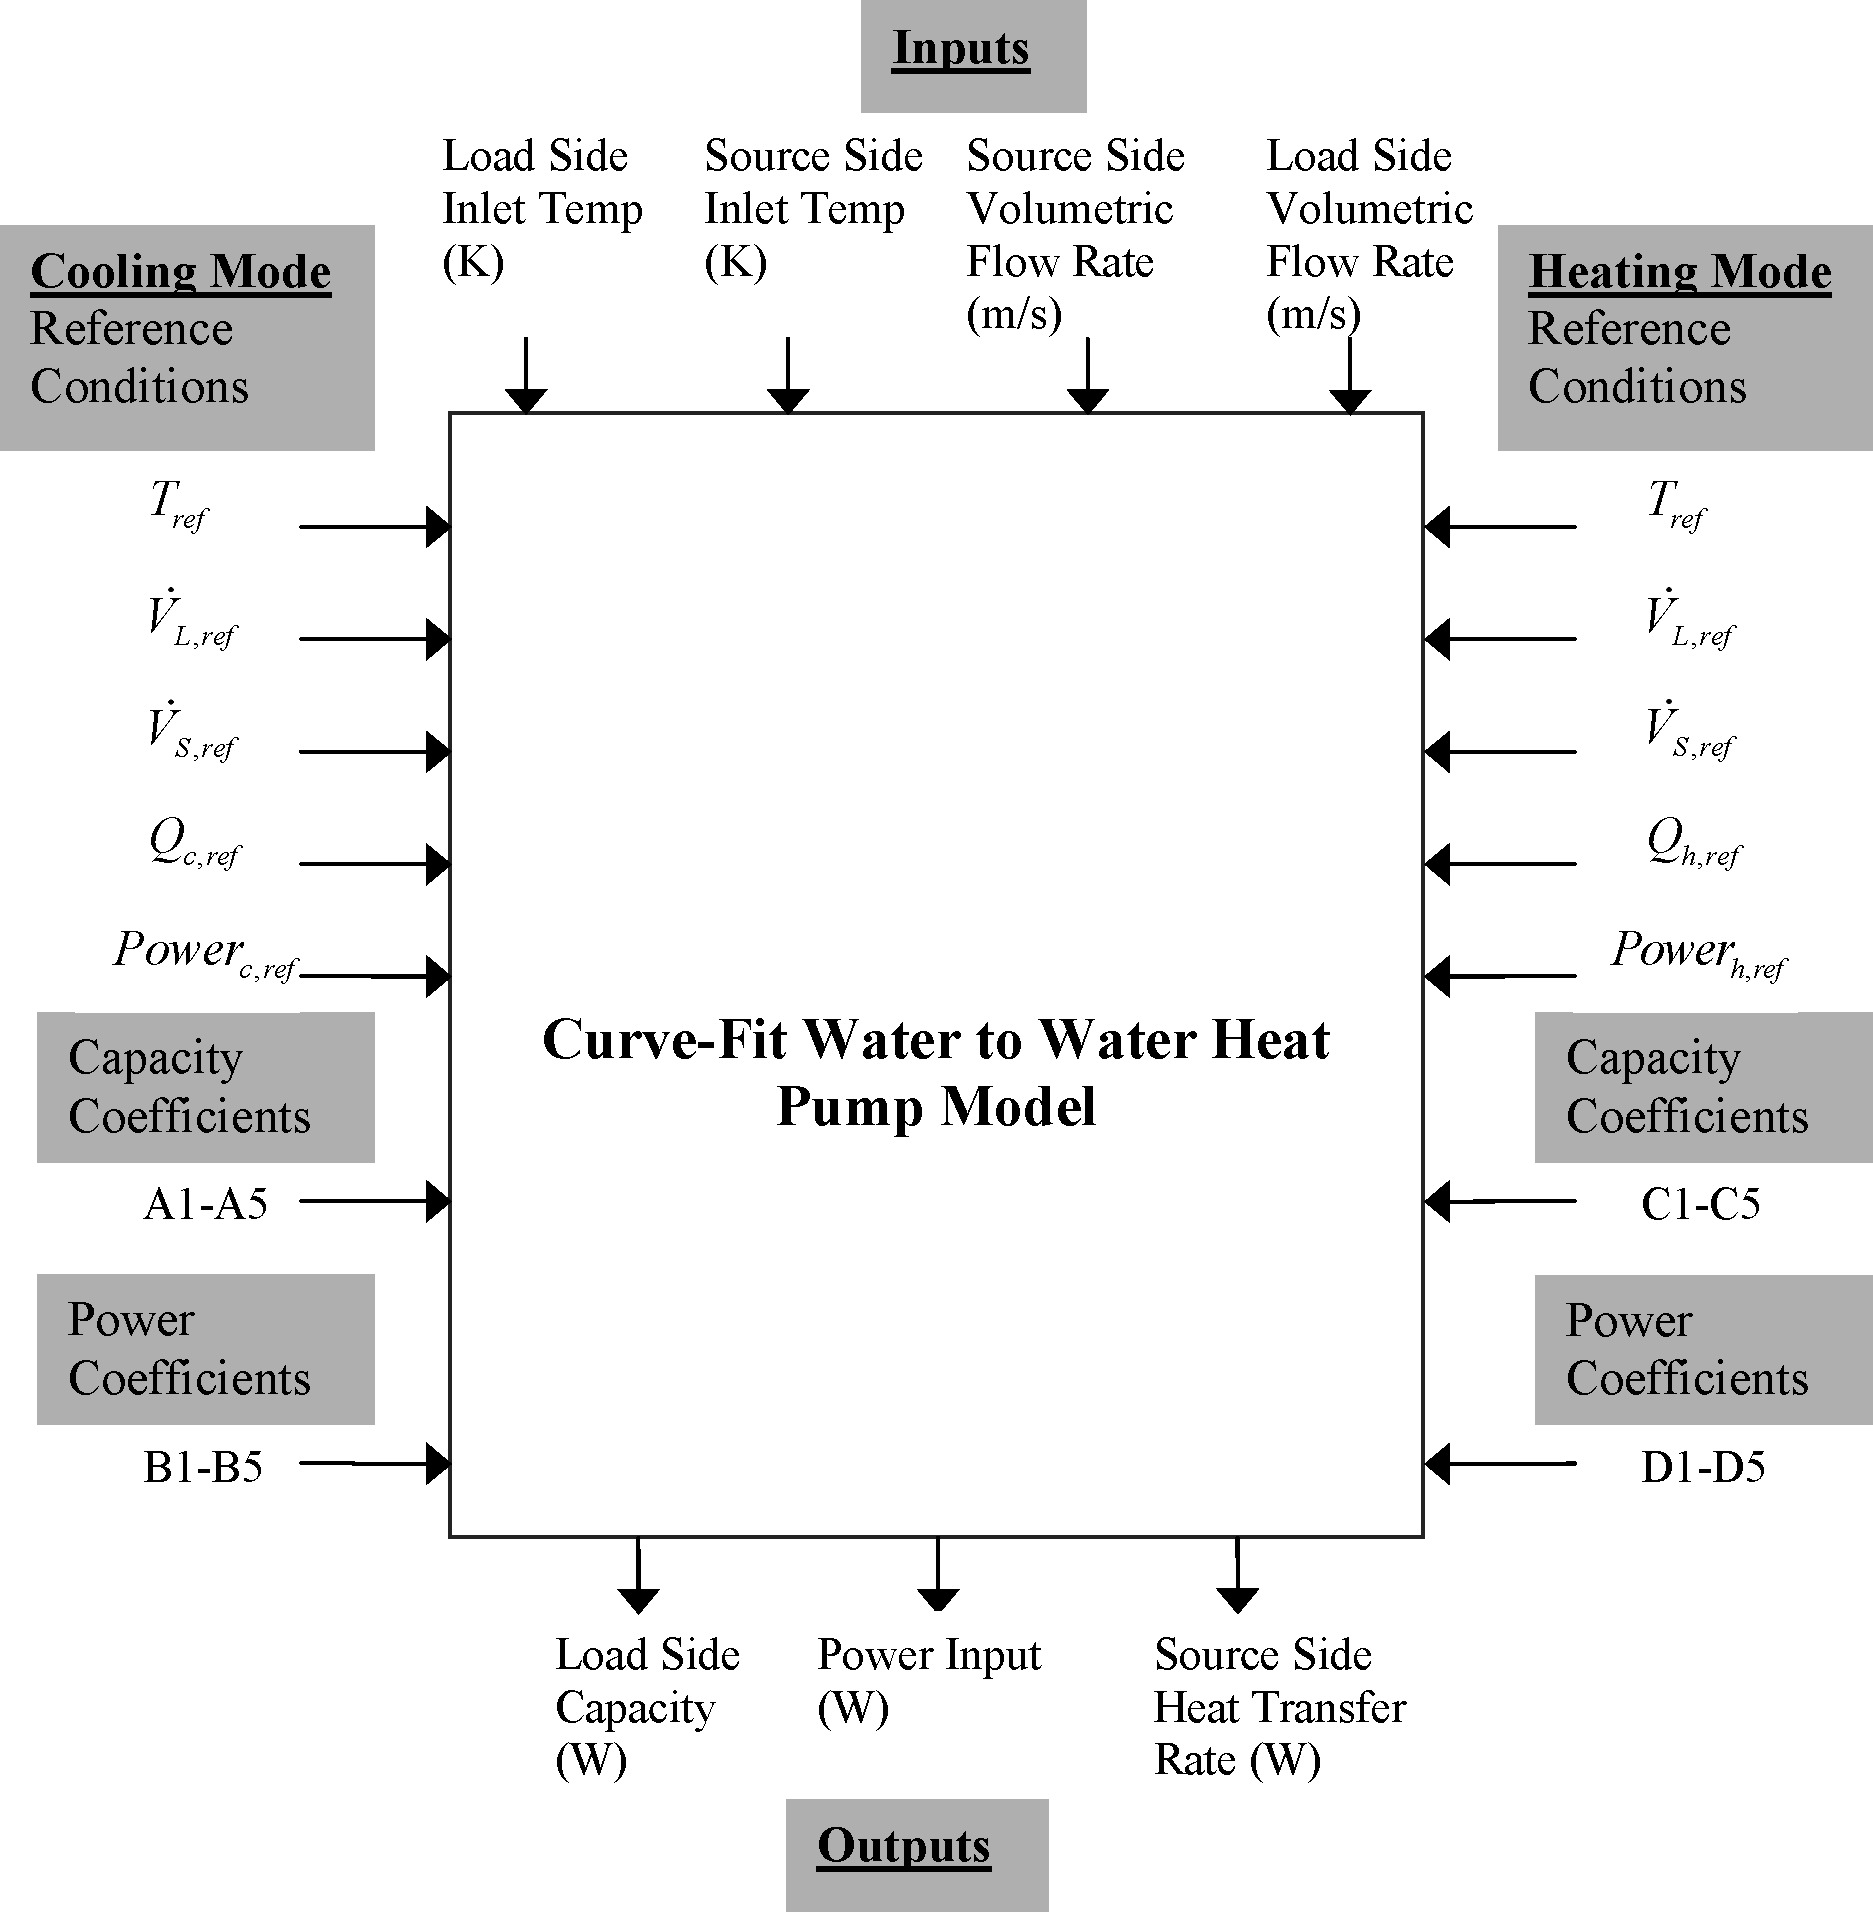 Information Flow Chart for Water-To-Water Heat Pump Equation Fit (Tang 2005) [fig:information-flow-chart-for-water-to-water]